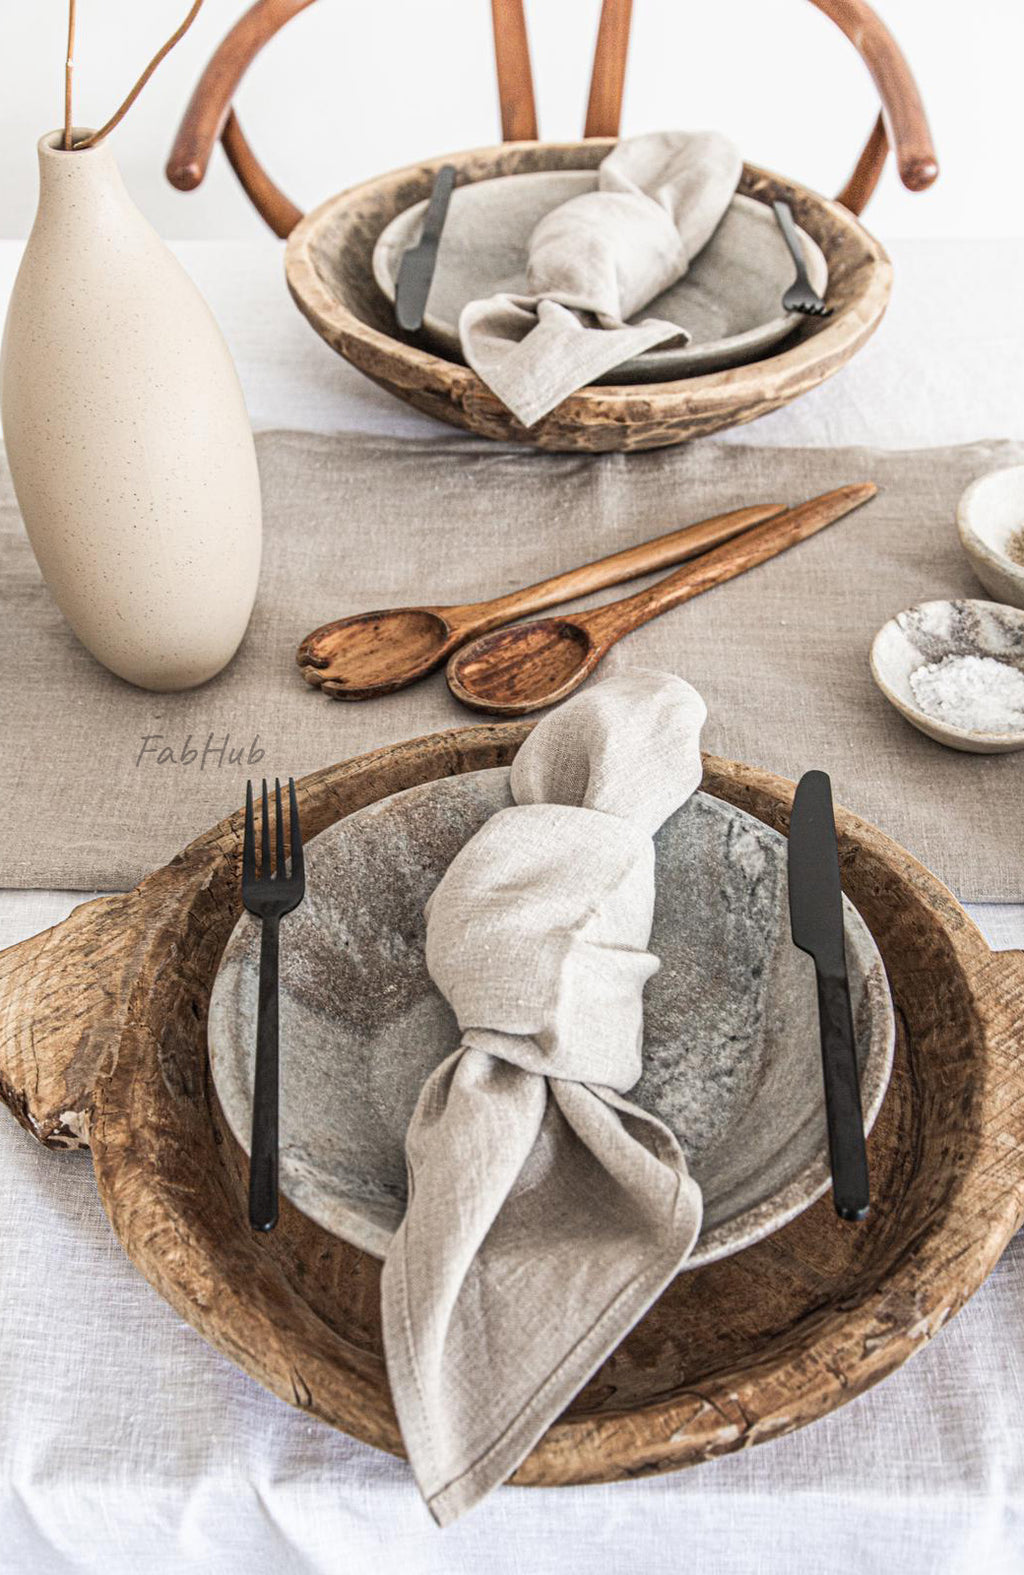 Introducing our new Simply Linen collection